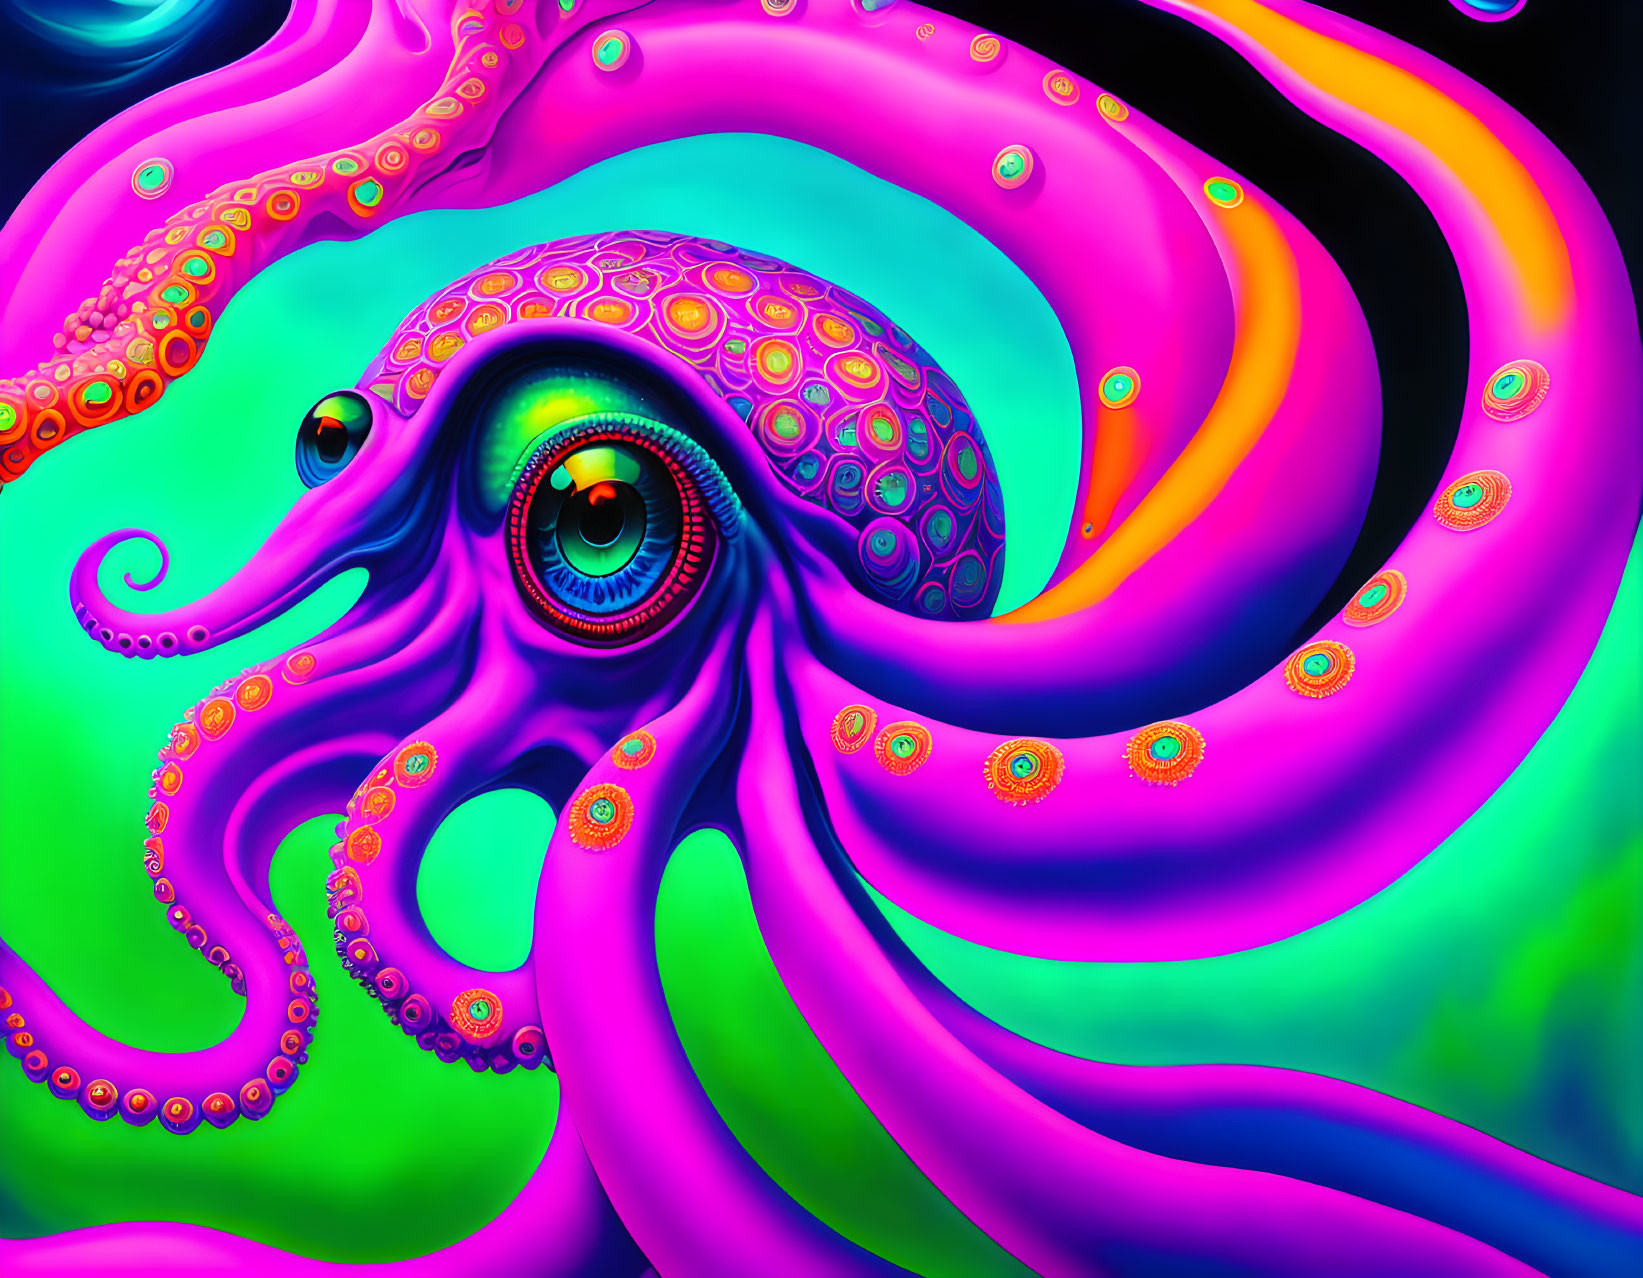 Colorful Stylized Octopus Artwork with Psychedelic Patterns